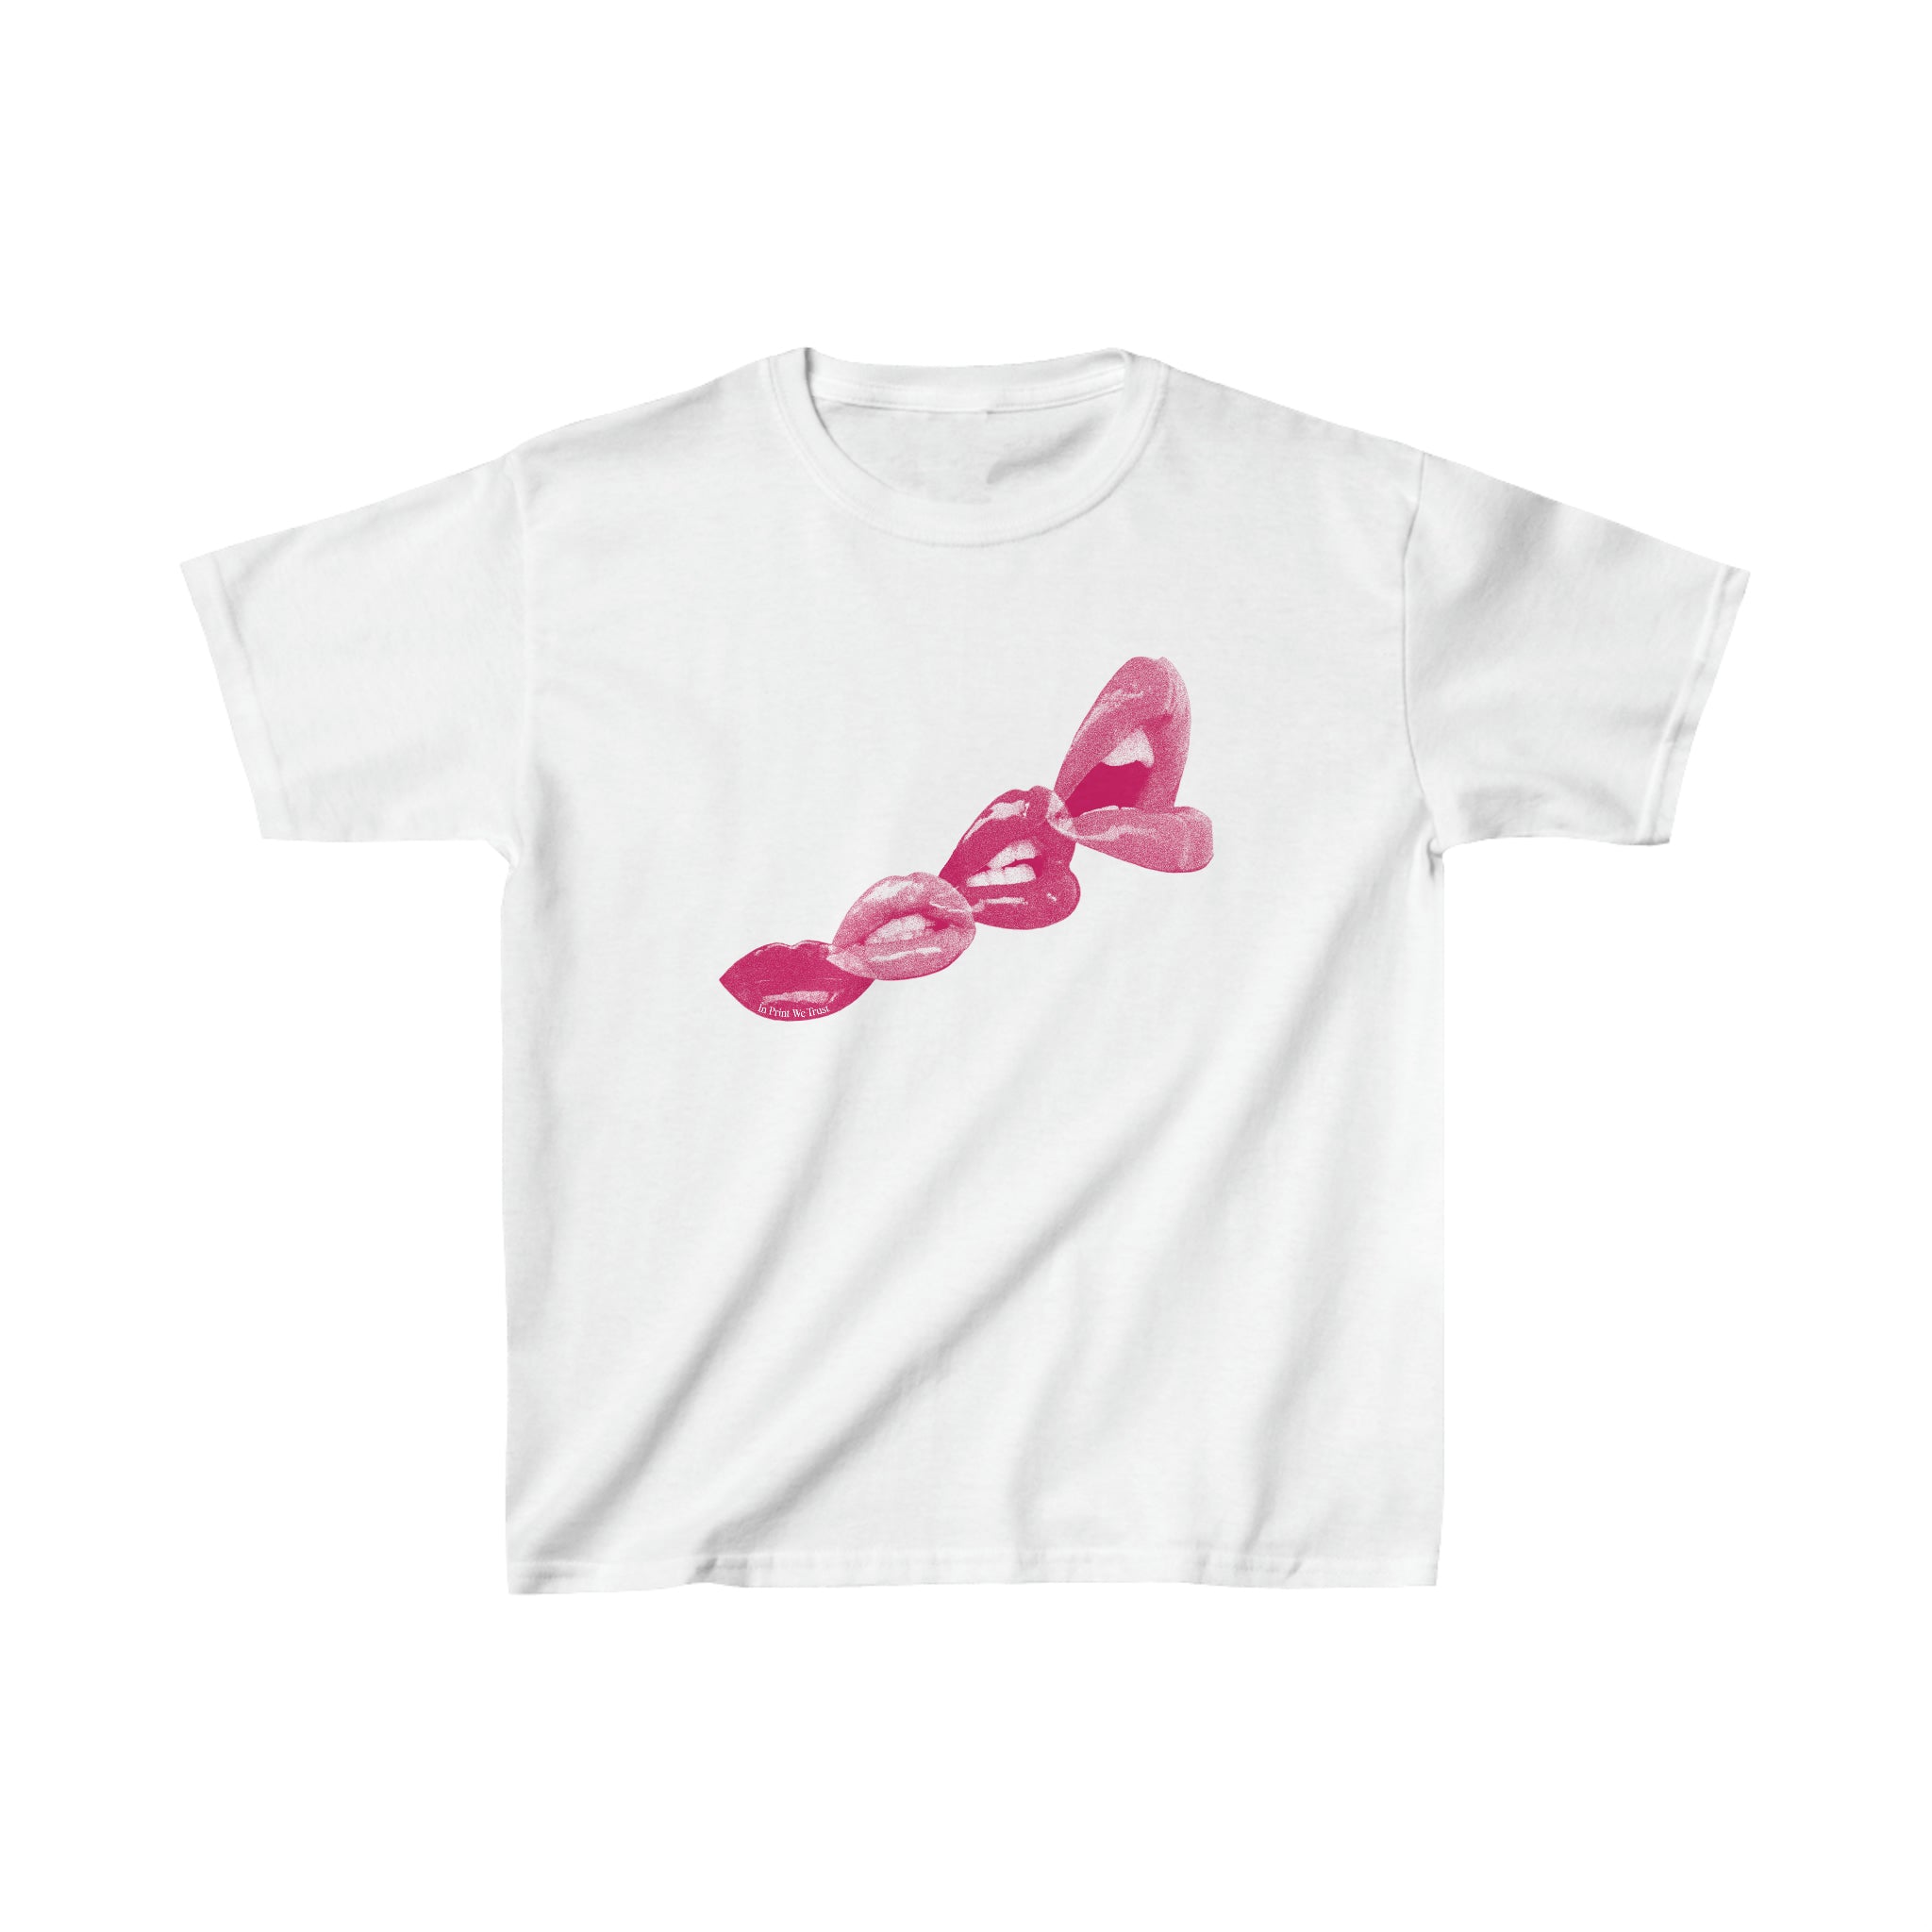 'Give Me A Kiss' baby tee - In Print We Trust